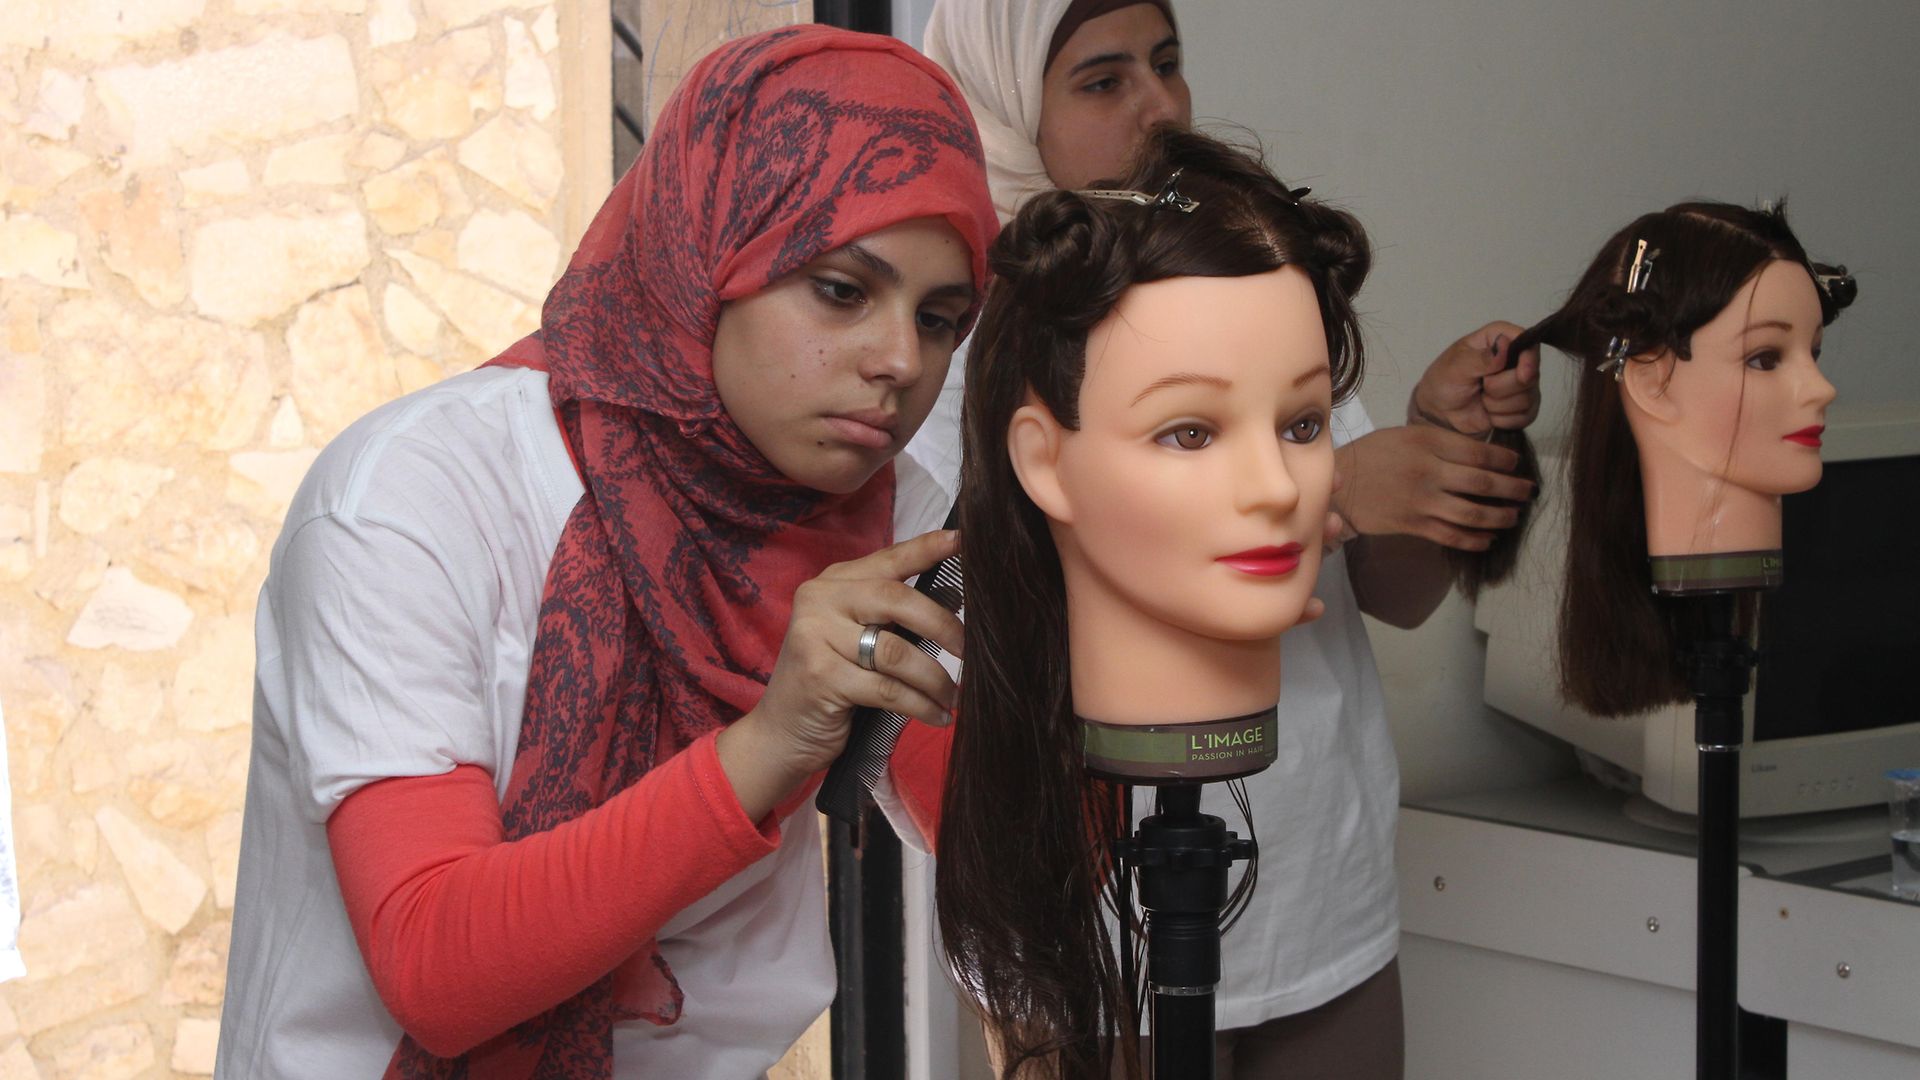 In 2014, Schwarzkopf Professional also launched the Shaping Futures initiative in Jordan.